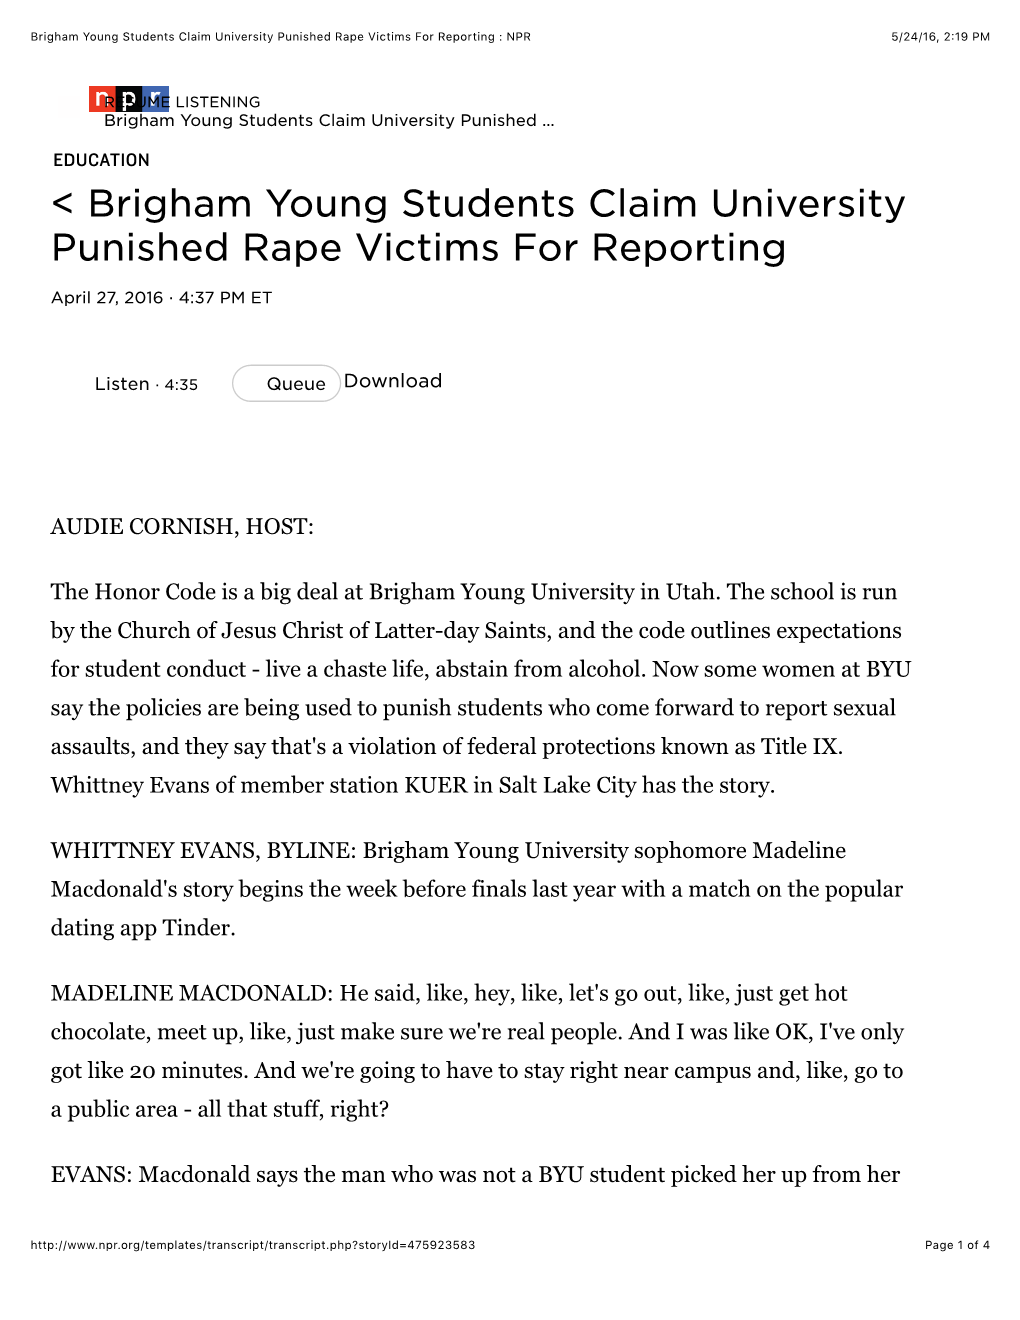 Brigham Young Students Claim University Punished Rape Victims for Reporting : NPR 5/24/16, 2:19 PM